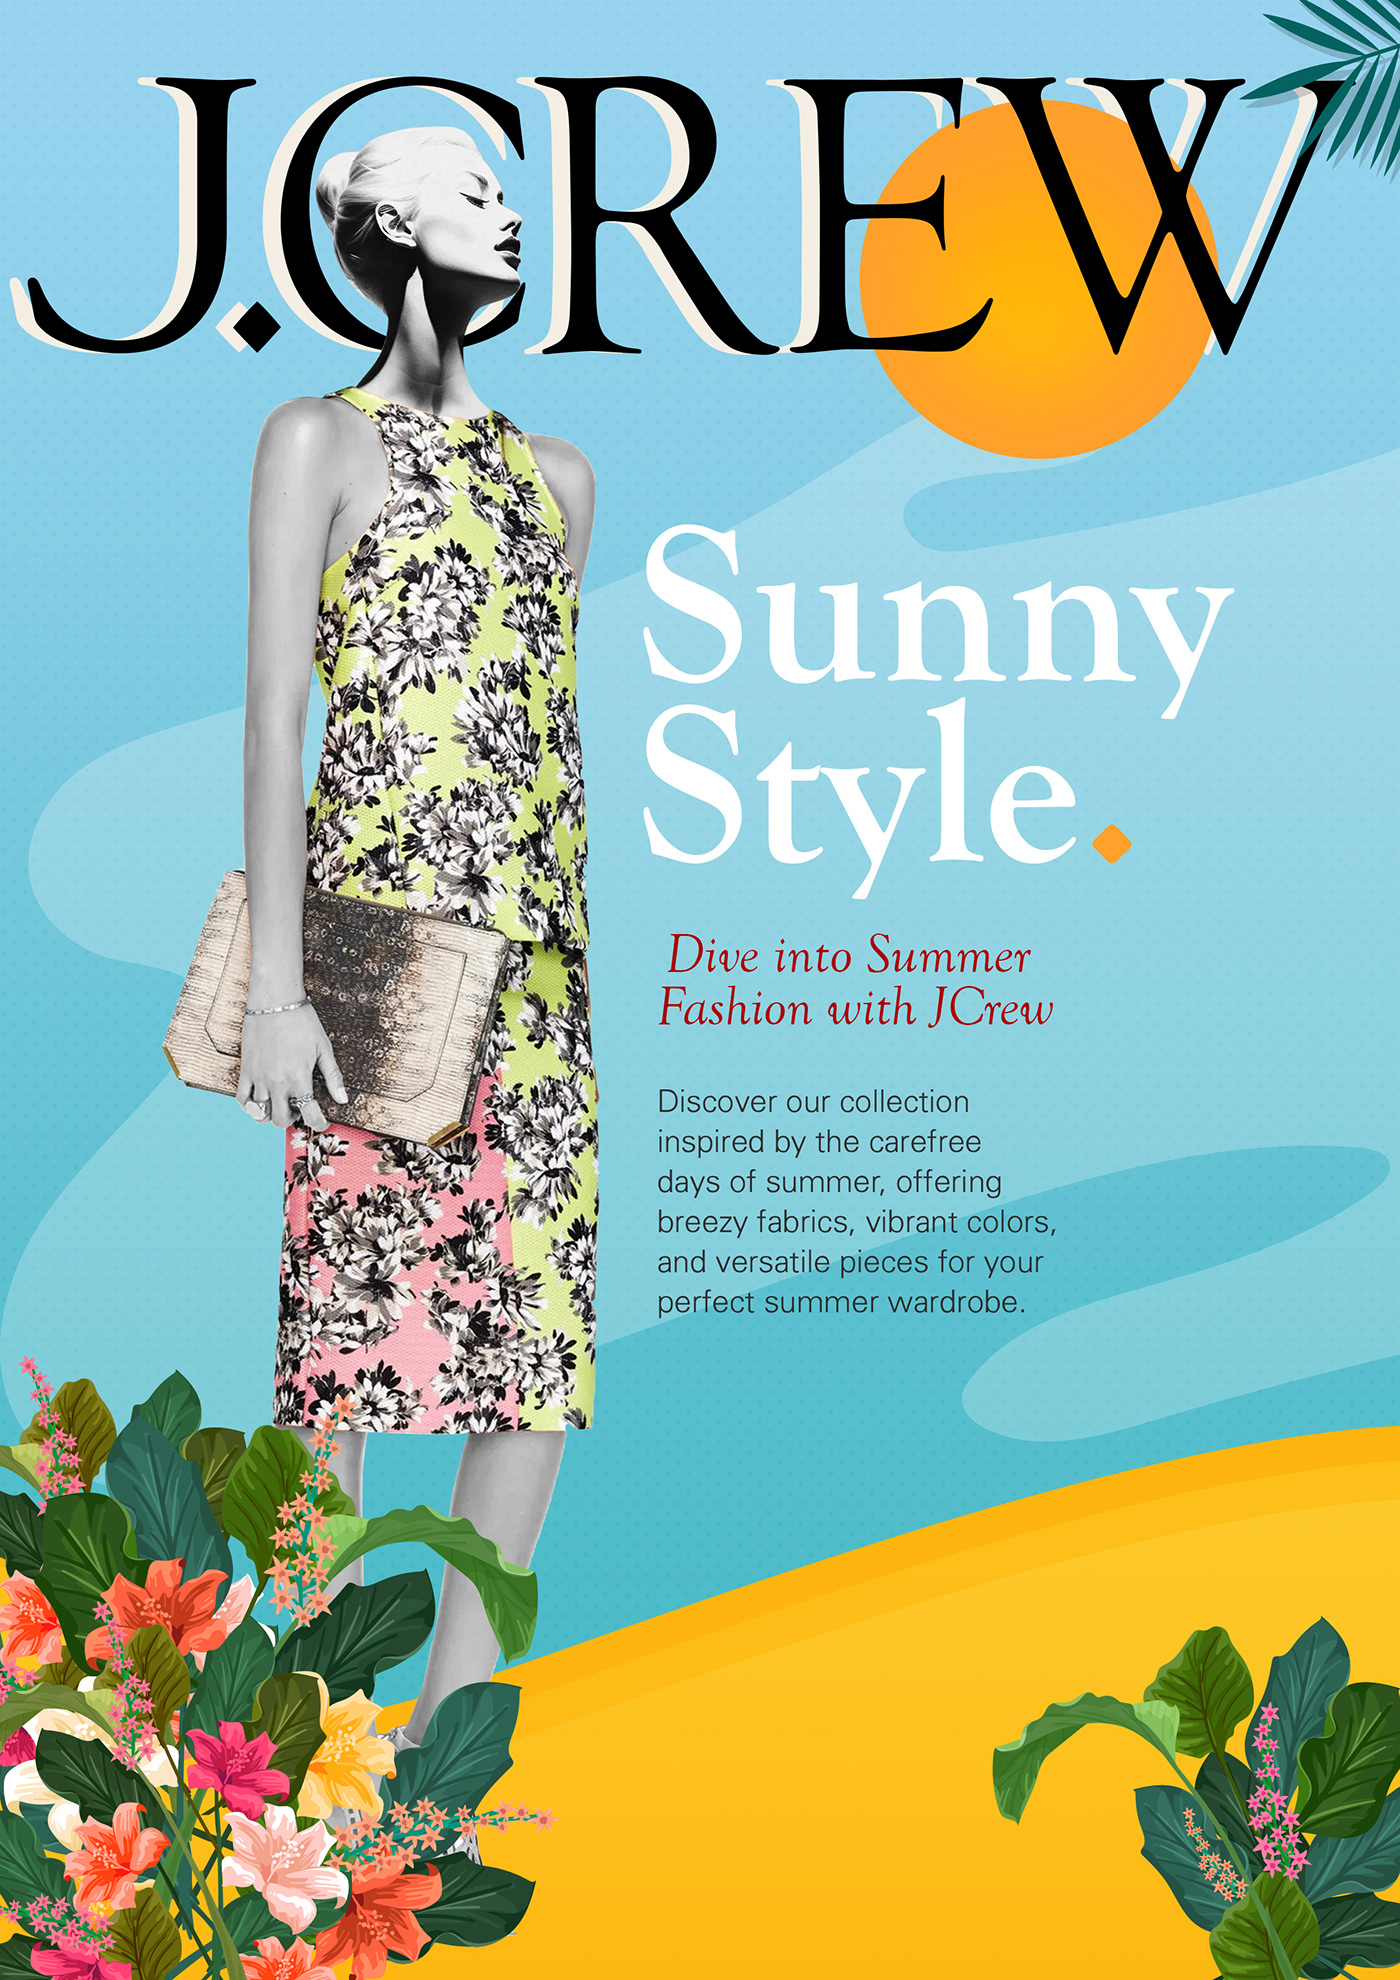 Collage of JCrew Fashion Posters showcasing designs for all four seasons: Winter, Autumn, Winter,